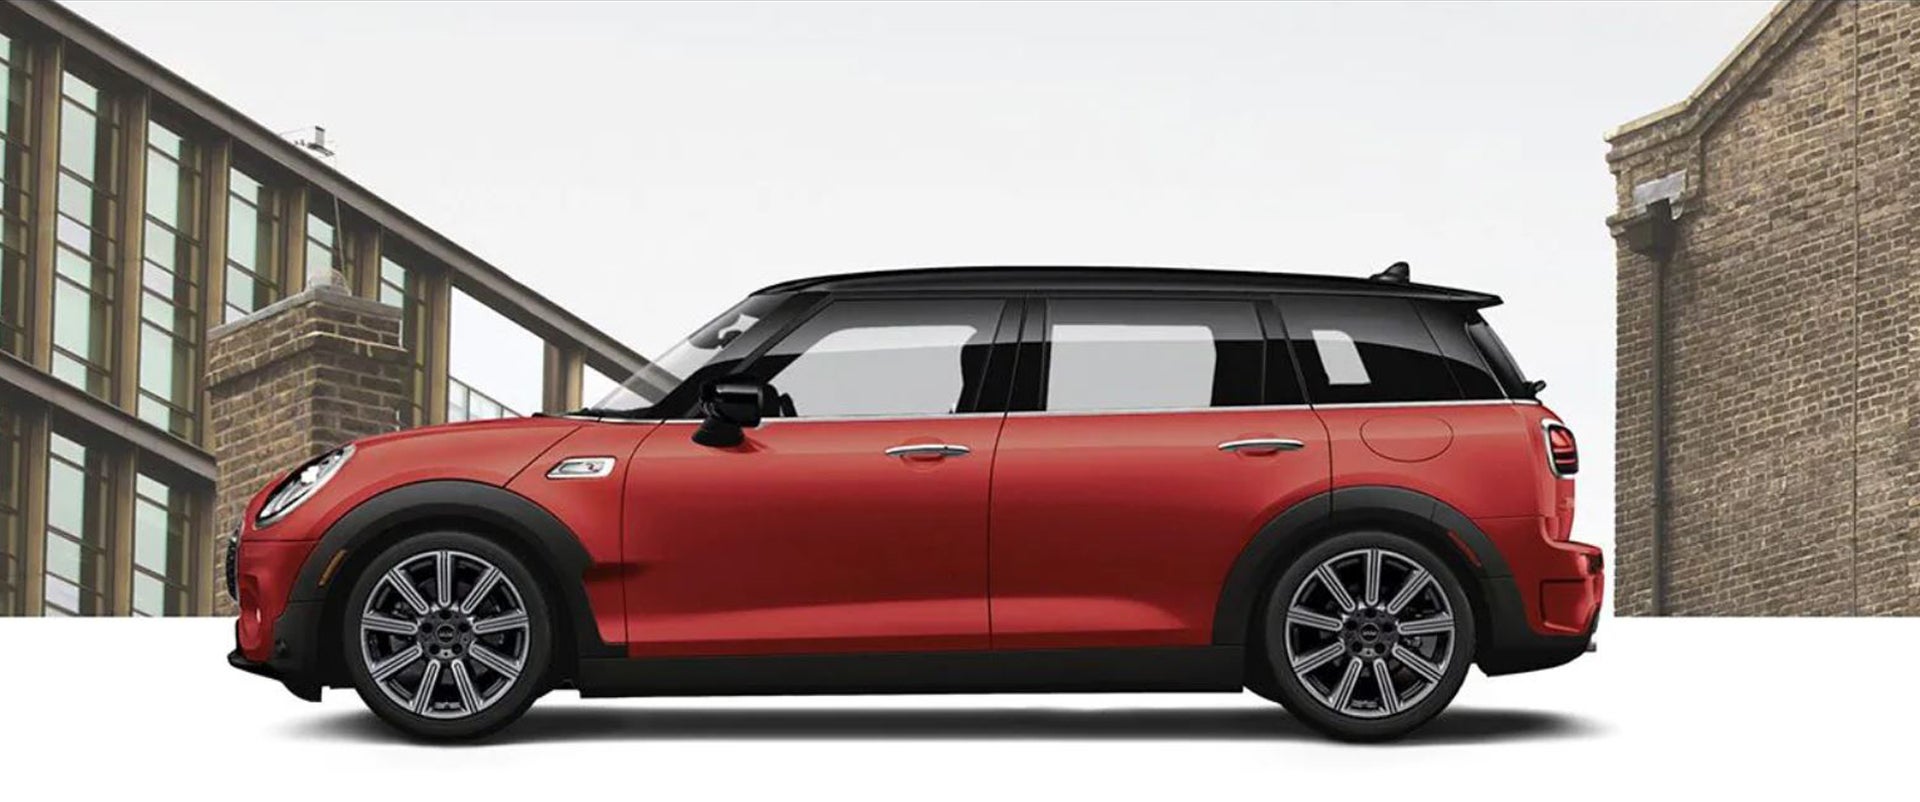 https://www.miniofsterling.com/static/brand-mini/2022-mini-clubman/The-2O22-MINI-Clubman-rolling-in-front-of-a-building.JPG